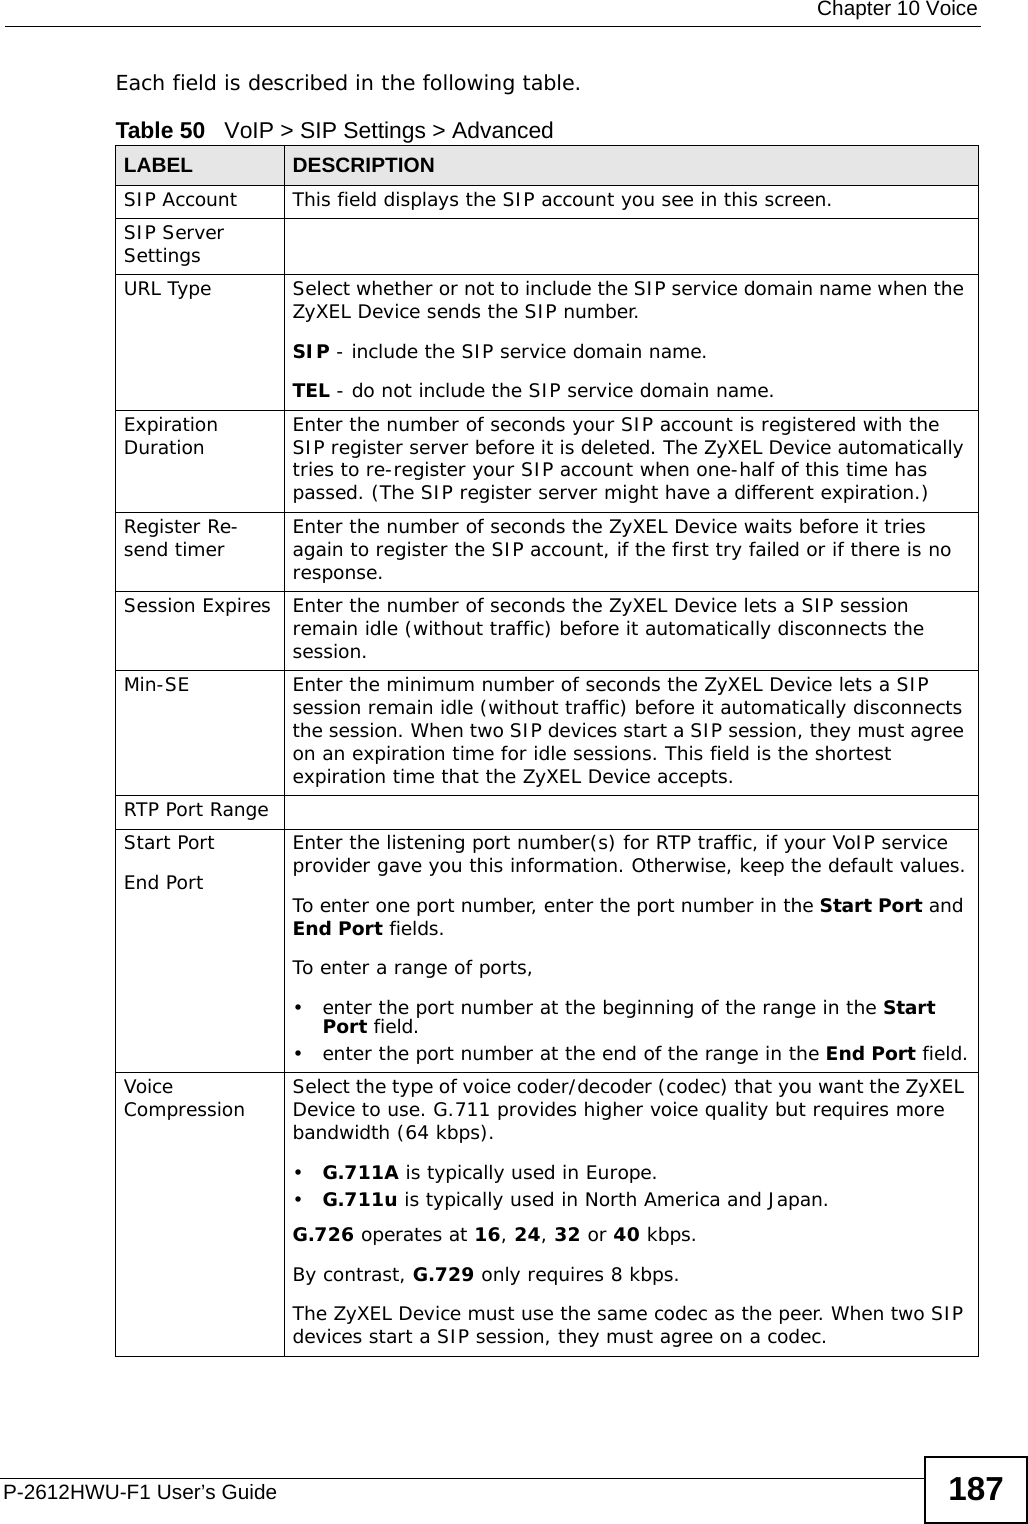  Chapter 10 VoiceP-2612HWU-F1 User’s Guide 187Each field is described in the following table.Table 50   VoIP &gt; SIP Settings &gt; AdvancedLABEL DESCRIPTIONSIP Account This field displays the SIP account you see in this screen.SIP Server SettingsURL Type Select whether or not to include the SIP service domain name when the ZyXEL Device sends the SIP number.SIP - include the SIP service domain name.TEL - do not include the SIP service domain name.Expiration Duration Enter the number of seconds your SIP account is registered with the SIP register server before it is deleted. The ZyXEL Device automatically tries to re-register your SIP account when one-half of this time has passed. (The SIP register server might have a different expiration.)Register Re-send timer Enter the number of seconds the ZyXEL Device waits before it tries again to register the SIP account, if the first try failed or if there is no response.Session Expires Enter the number of seconds the ZyXEL Device lets a SIP session remain idle (without traffic) before it automatically disconnects the session.Min-SE Enter the minimum number of seconds the ZyXEL Device lets a SIP session remain idle (without traffic) before it automatically disconnects the session. When two SIP devices start a SIP session, they must agree on an expiration time for idle sessions. This field is the shortest expiration time that the ZyXEL Device accepts.RTP Port RangeStart PortEnd PortEnter the listening port number(s) for RTP traffic, if your VoIP service provider gave you this information. Otherwise, keep the default values.To enter one port number, enter the port number in the Start Port and End Port fields.To enter a range of ports,• enter the port number at the beginning of the range in the Start Port field.• enter the port number at the end of the range in the End Port field.Voice Compression Select the type of voice coder/decoder (codec) that you want the ZyXEL Device to use. G.711 provides higher voice quality but requires more bandwidth (64 kbps).•G.711A is typically used in Europe.•G.711u is typically used in North America and Japan.G.726 operates at 16, 24, 32 or 40 kbps.By contrast, G.729 only requires 8 kbps.The ZyXEL Device must use the same codec as the peer. When two SIP devices start a SIP session, they must agree on a codec.